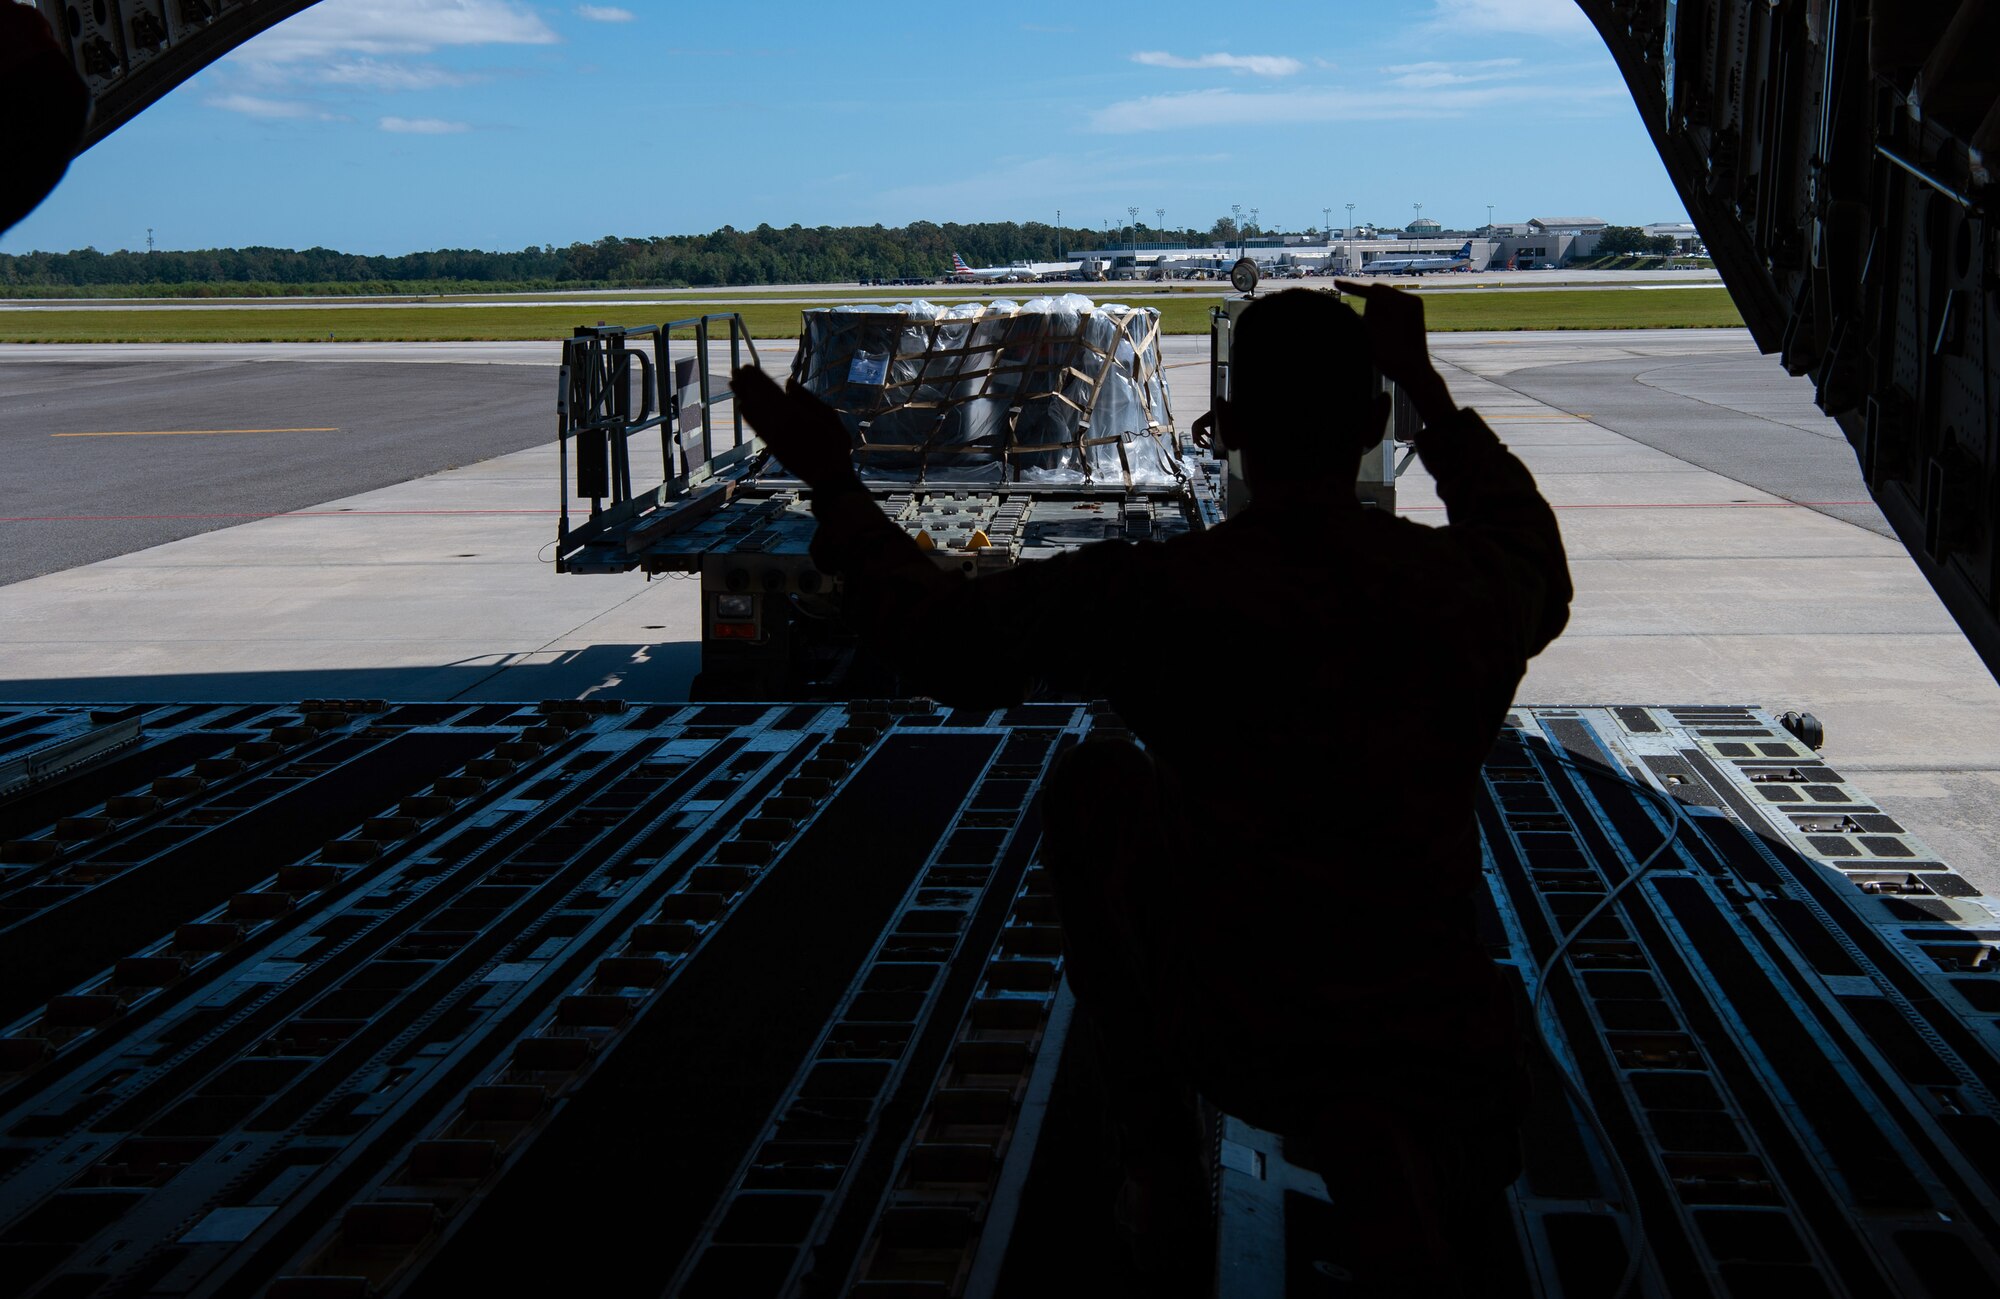 U.S. Air Force Staff Sgt. Marcello Moffat, 8th Airlift Squadron (AS) loadmaster, marshals a 1,000-pound loader toward a C-17 Globemaster III assigned to the 62nd Airlift Wing, Joint Base Lewis-McChord, Wash., at Altus Air Force Base, Okla., Oct. 24, 2019. Moffat and other 8th AS Airmen delivered more than 83,000 pounds of rice to Honduras for a humanitarian mission. (U.S Air Force photo by Senior Airman Tryphena Mayhugh)